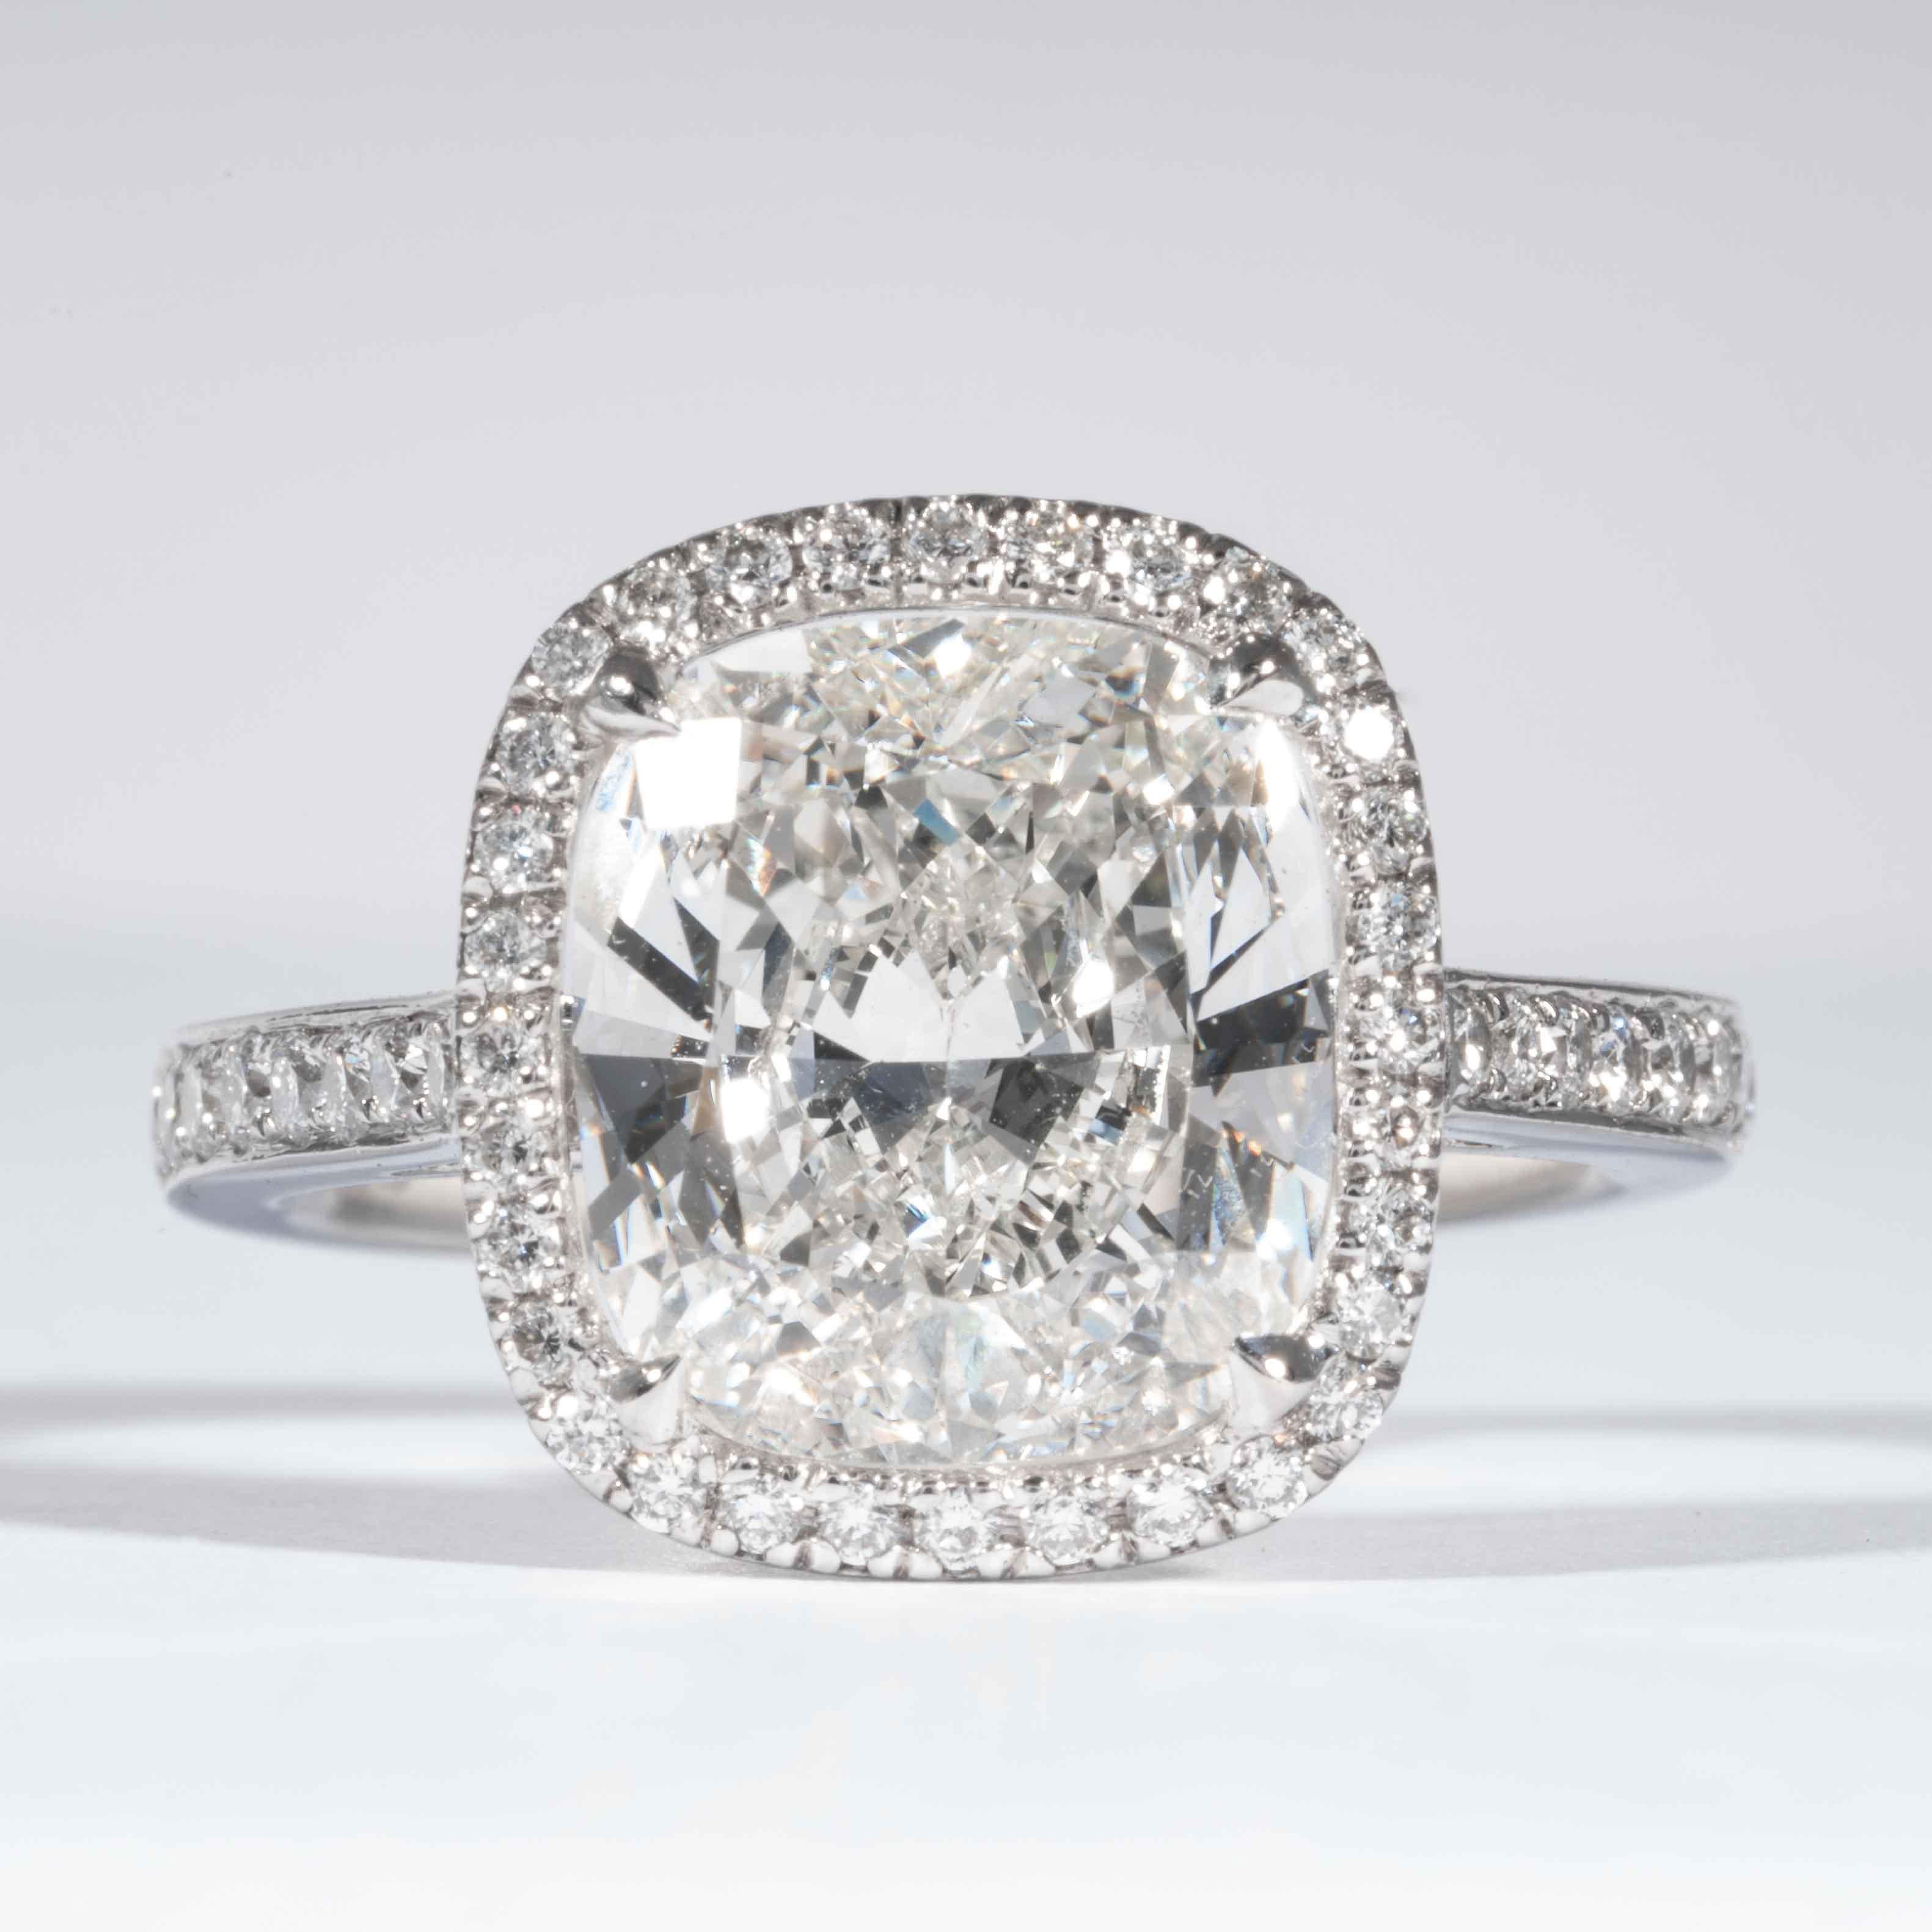 This diamond ring is offered by Shreve, Crump & Low. This 4.01 carat GIA Certified I VVS2 cushion cut diamond measuring 10.59 x 9.48 x 5.14 mm is custom set in a handcrafted Shreve, Crump & Low platinum ring. The 4.01 carat center diamond is